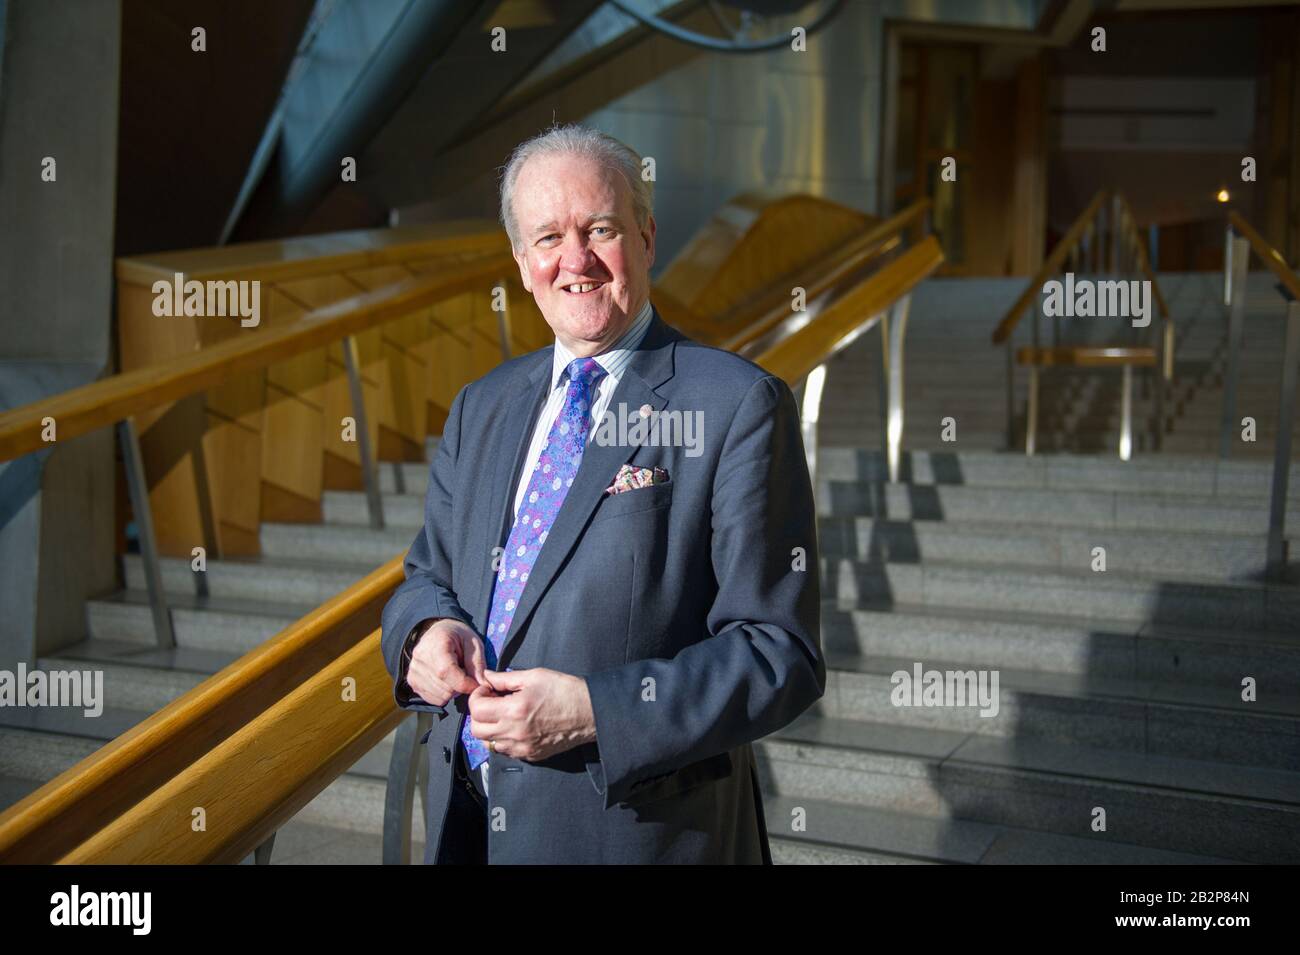 Edinburgh, UK. 3rd Mar, 2020. Pictured: Stewart Stevenson MSP - Scottish National. Party MSP for Banff and Buchan from 2001 to 2011, and after boundary changes he has been the MSP for Banffshire & Buchan Coast since 2011. He announced this week that he will be stepping down in next years Holyrood 2021 elections. Credit: Colin Fisher/Alamy Live News Stock Photo